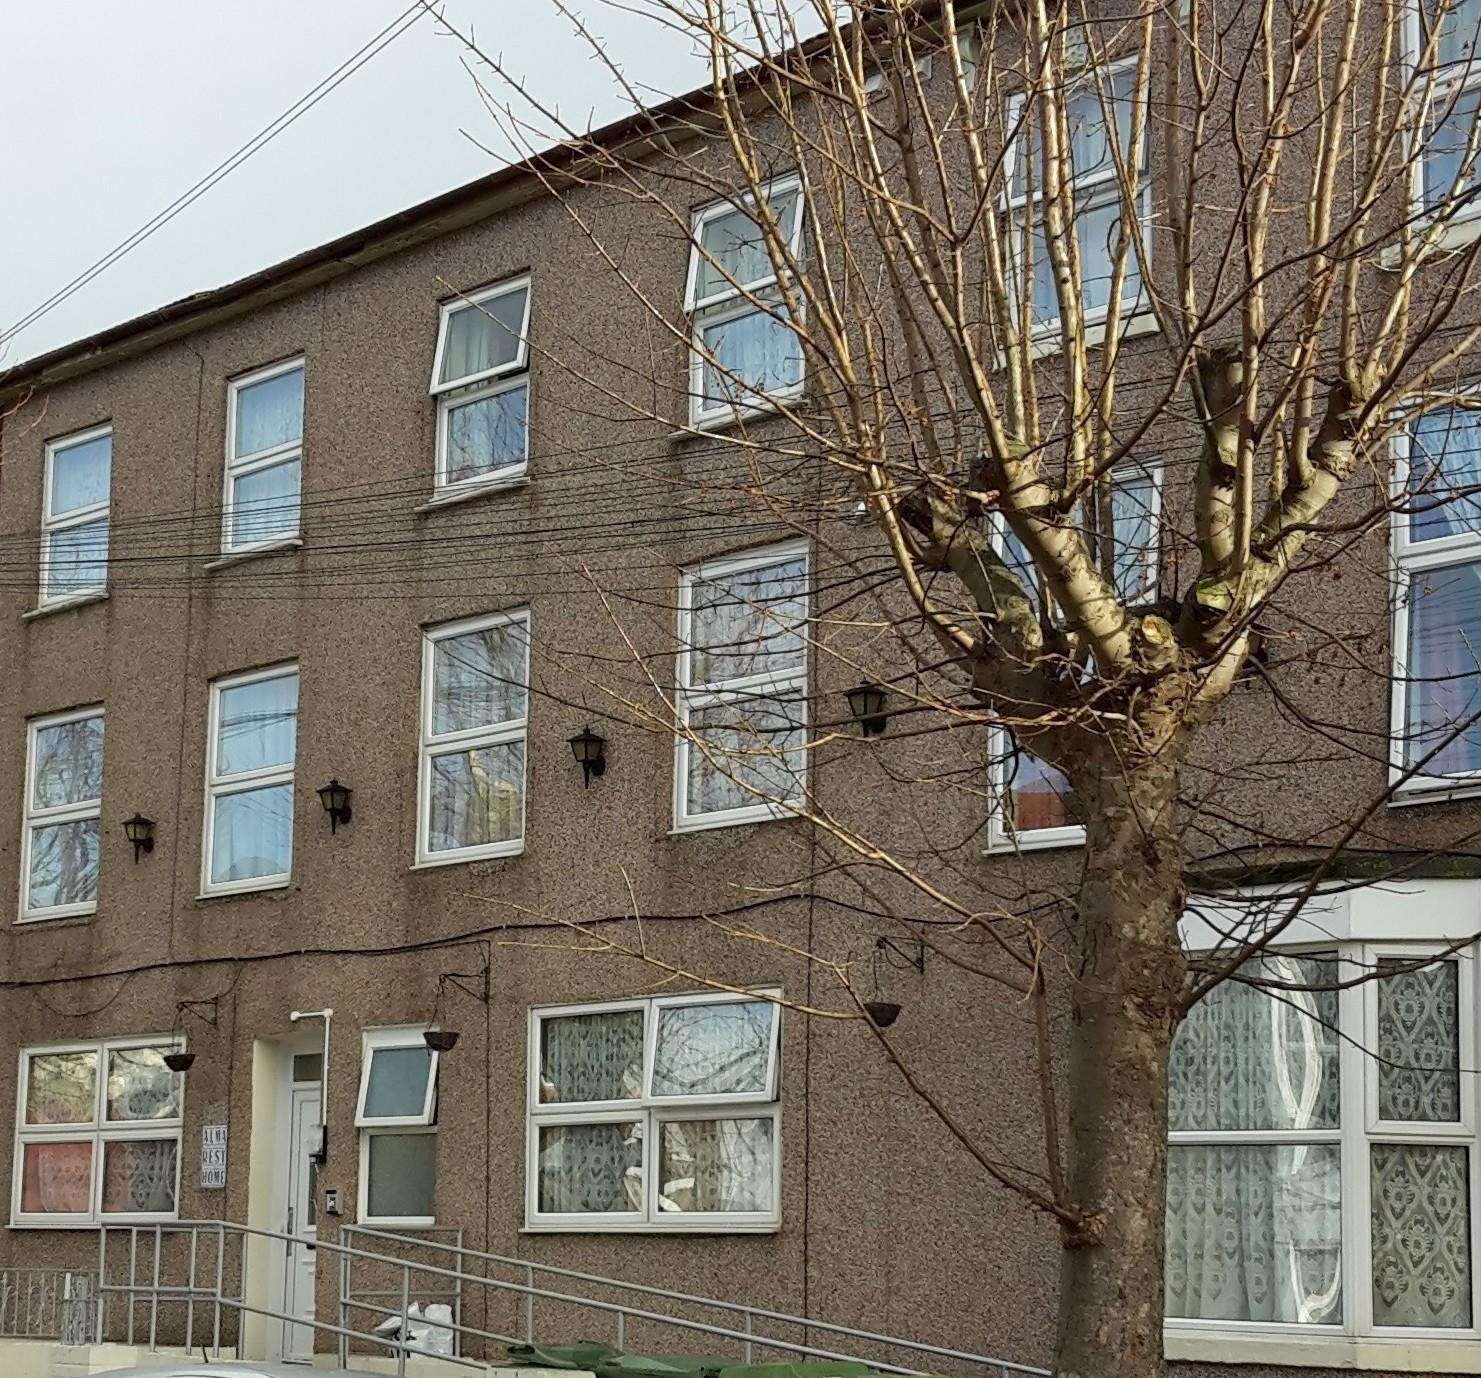 Care home bosses have been banned from housing residents overnight